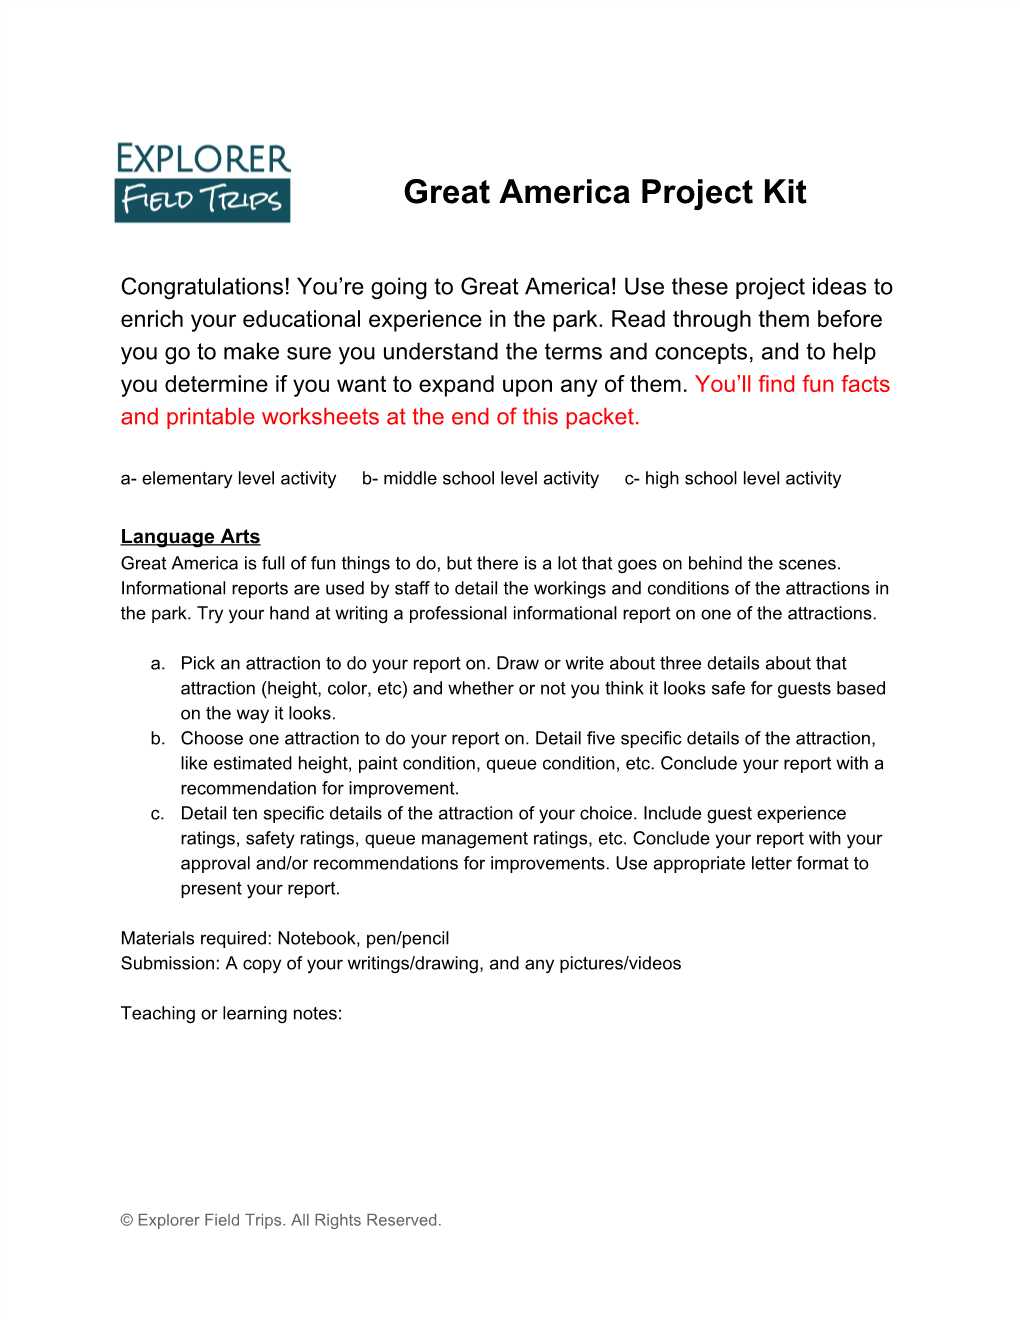 Great America Project Kit